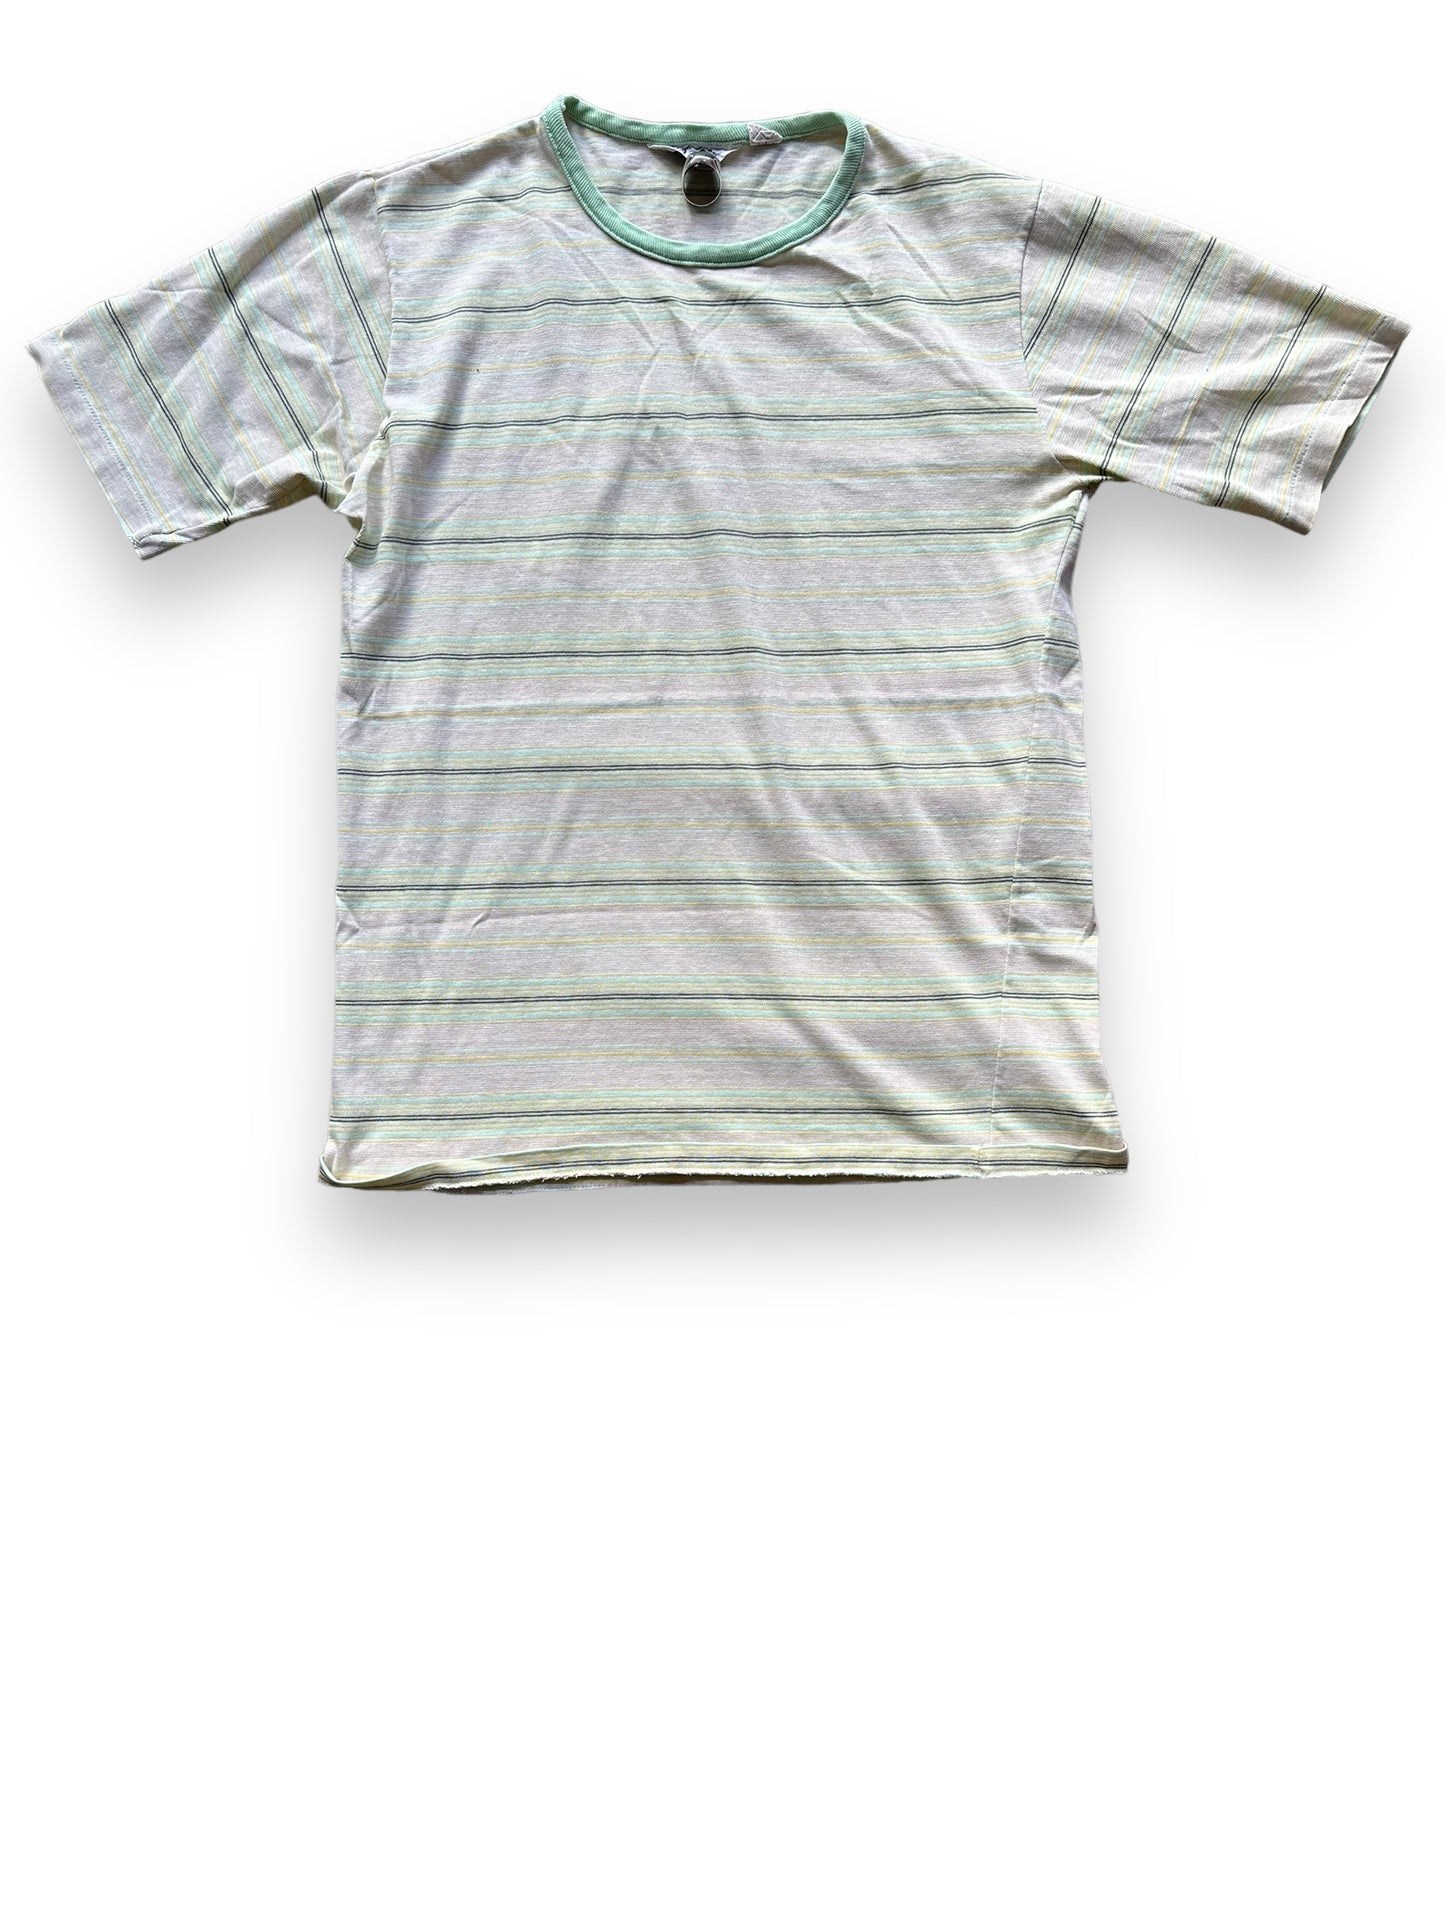 Front View of Vintage Mister Man Striped Tee SZ M | Vintage Striped Shirts Seattle | Barn Owl Vintage Tees Seattle